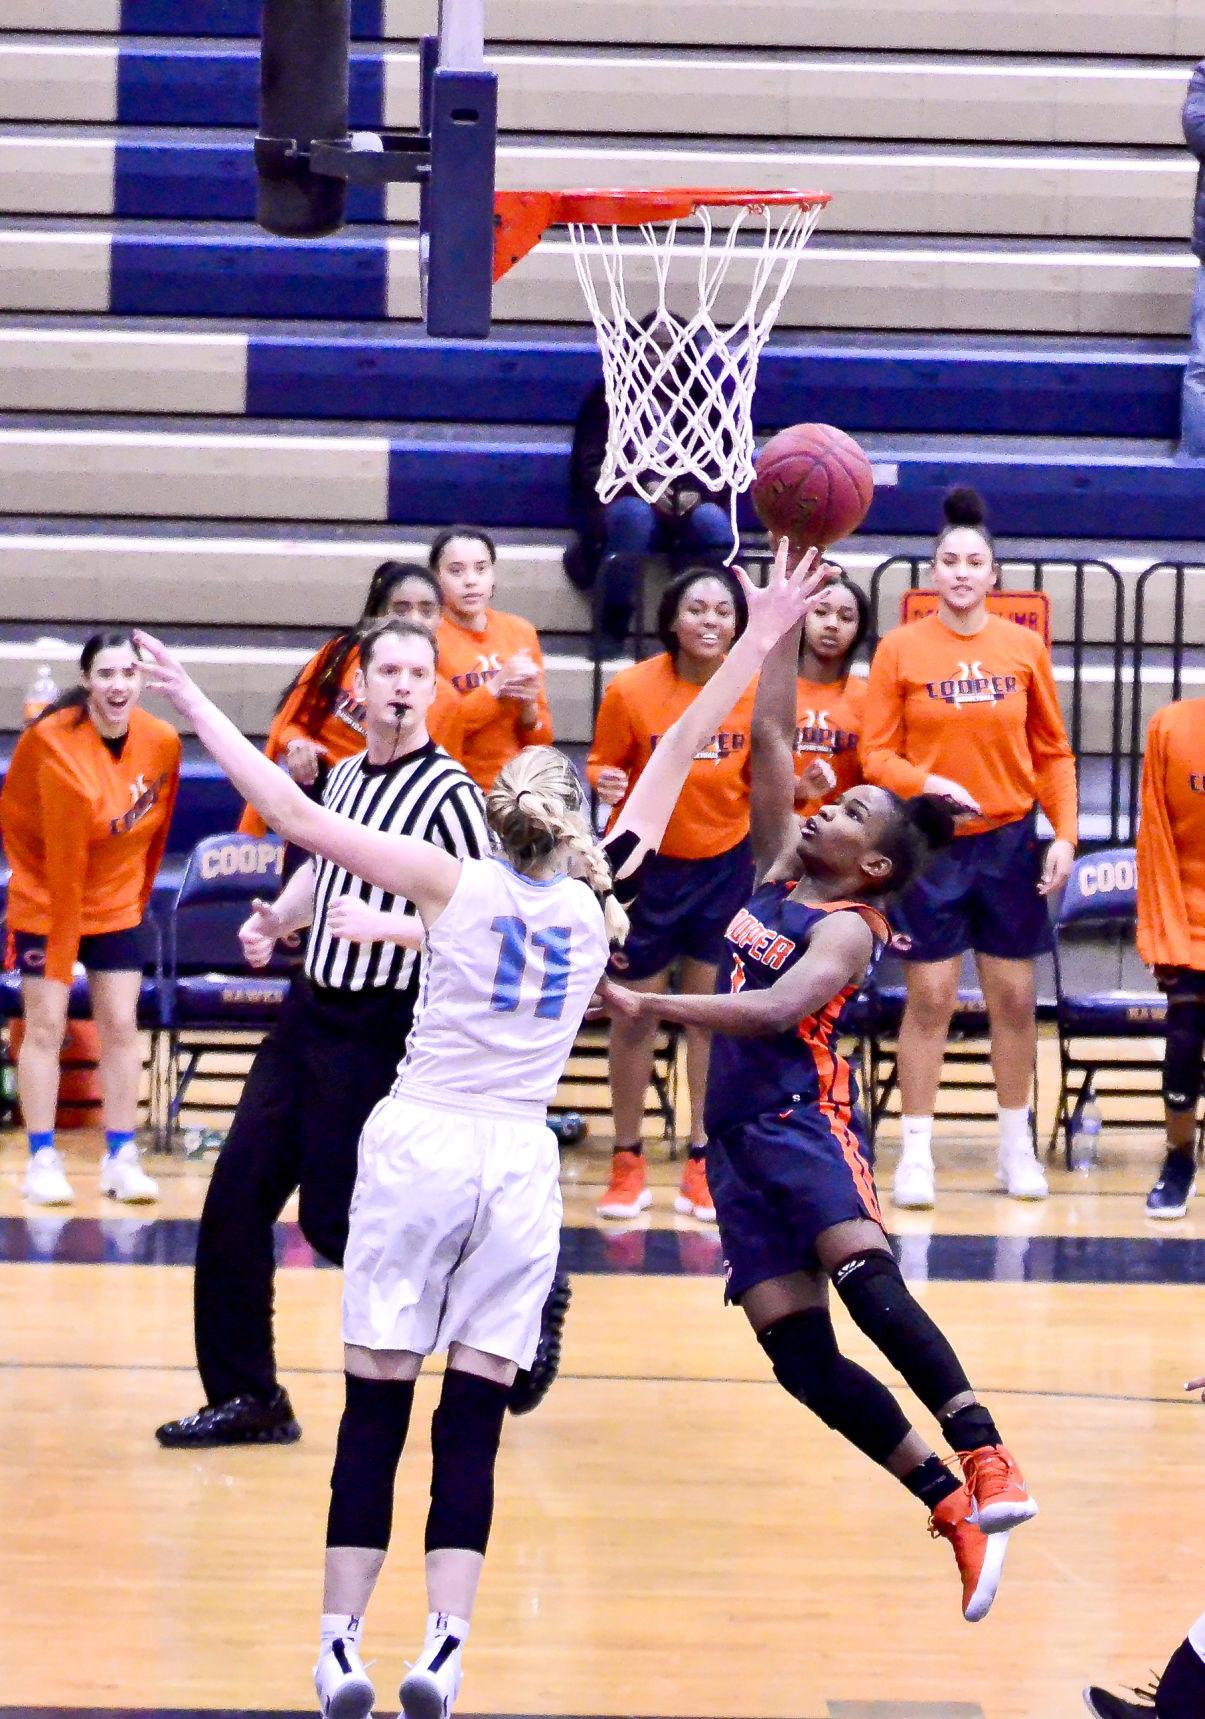 Robbinsdale Cooper girls basketball: Bouncing back with defense ...